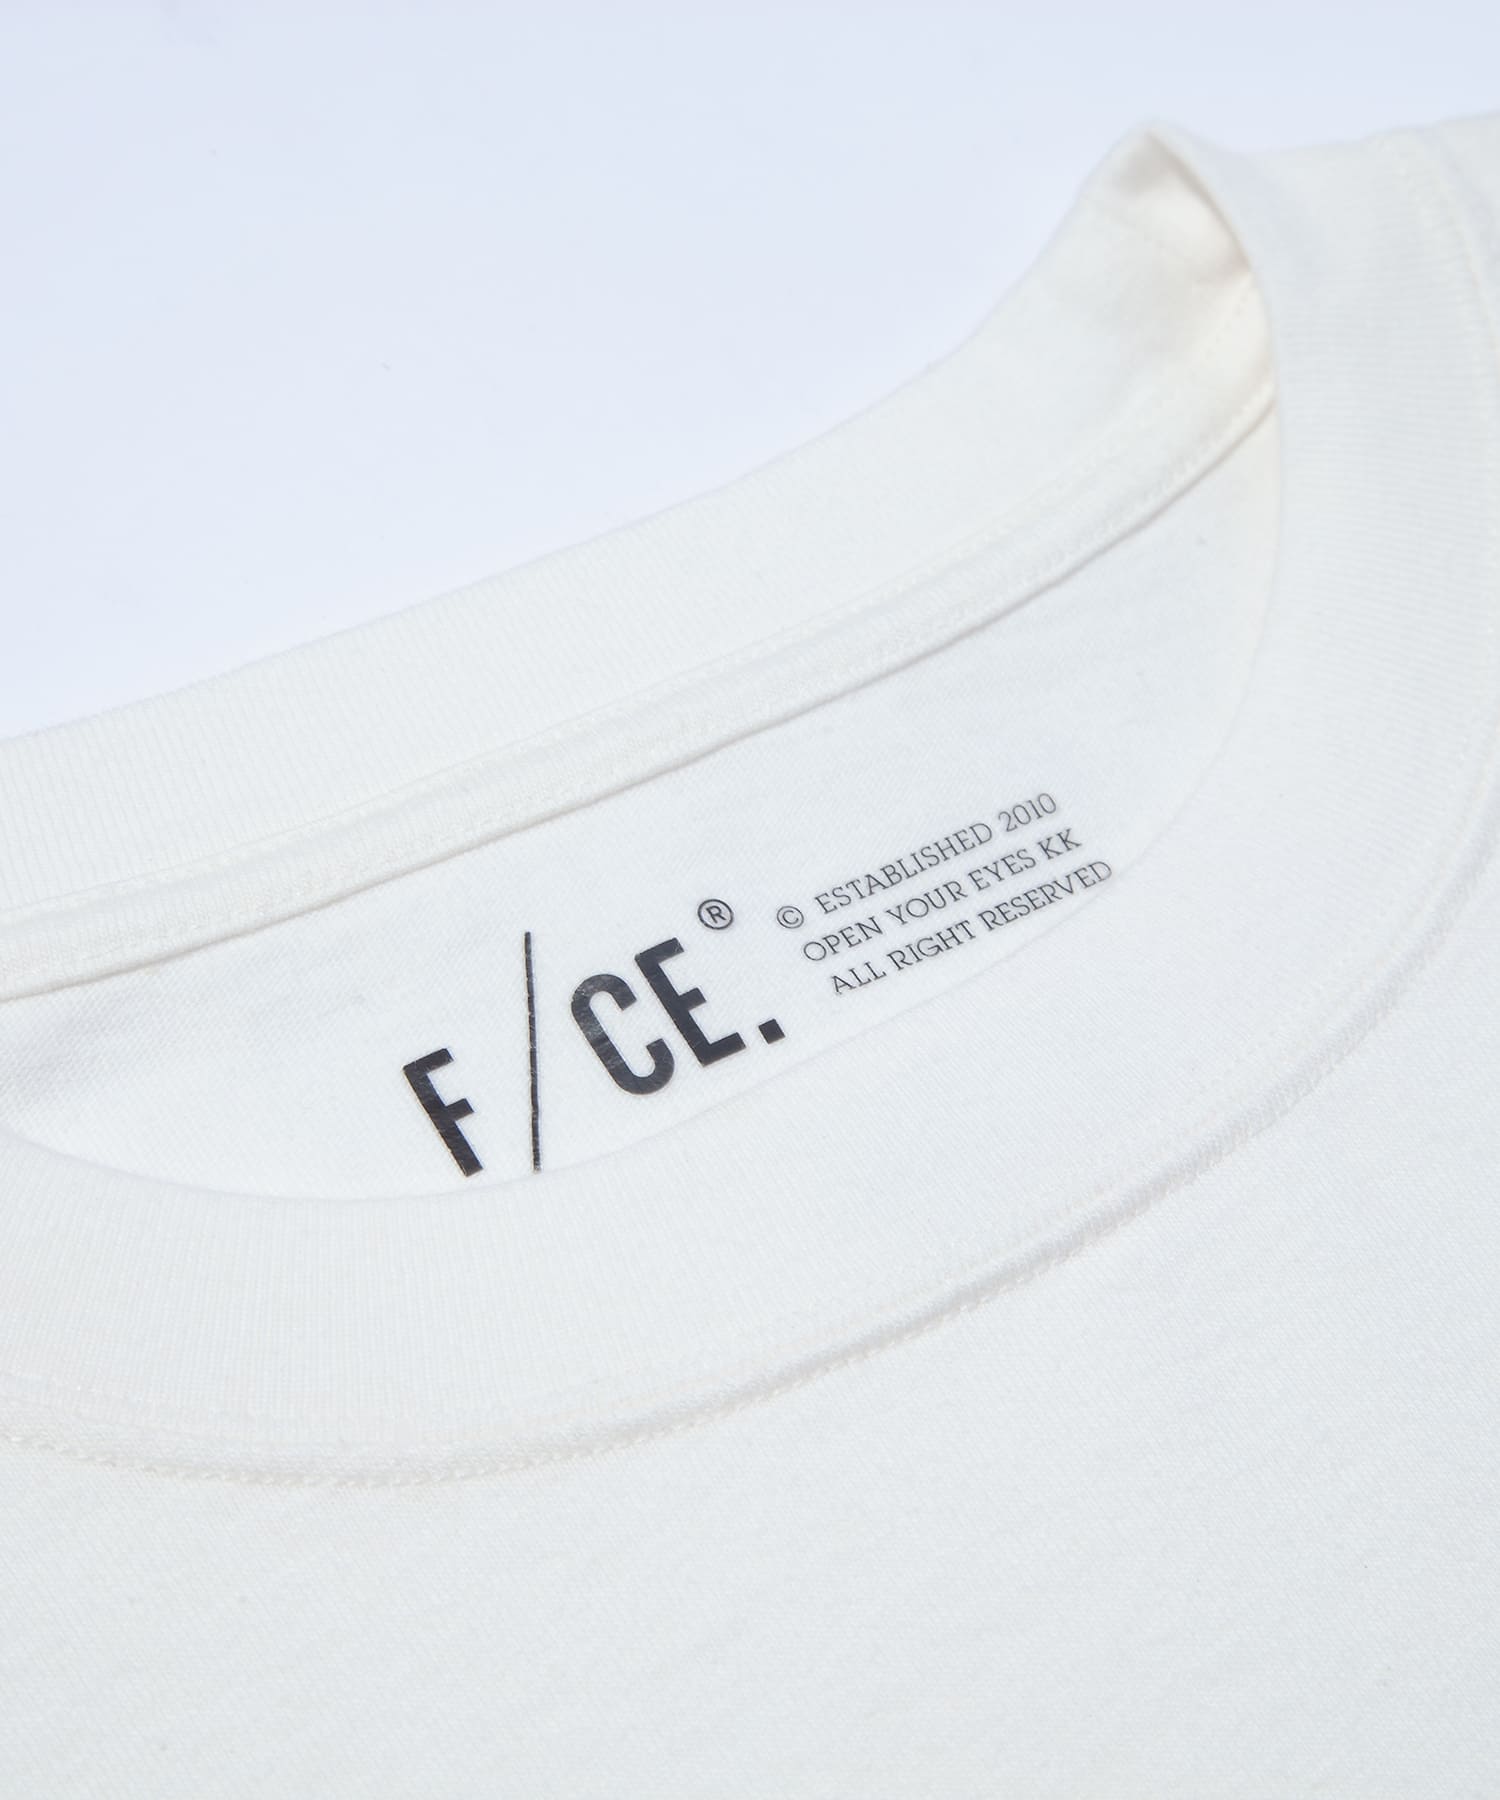 F/CE. / RE COLLEGE LONG SLEEVE